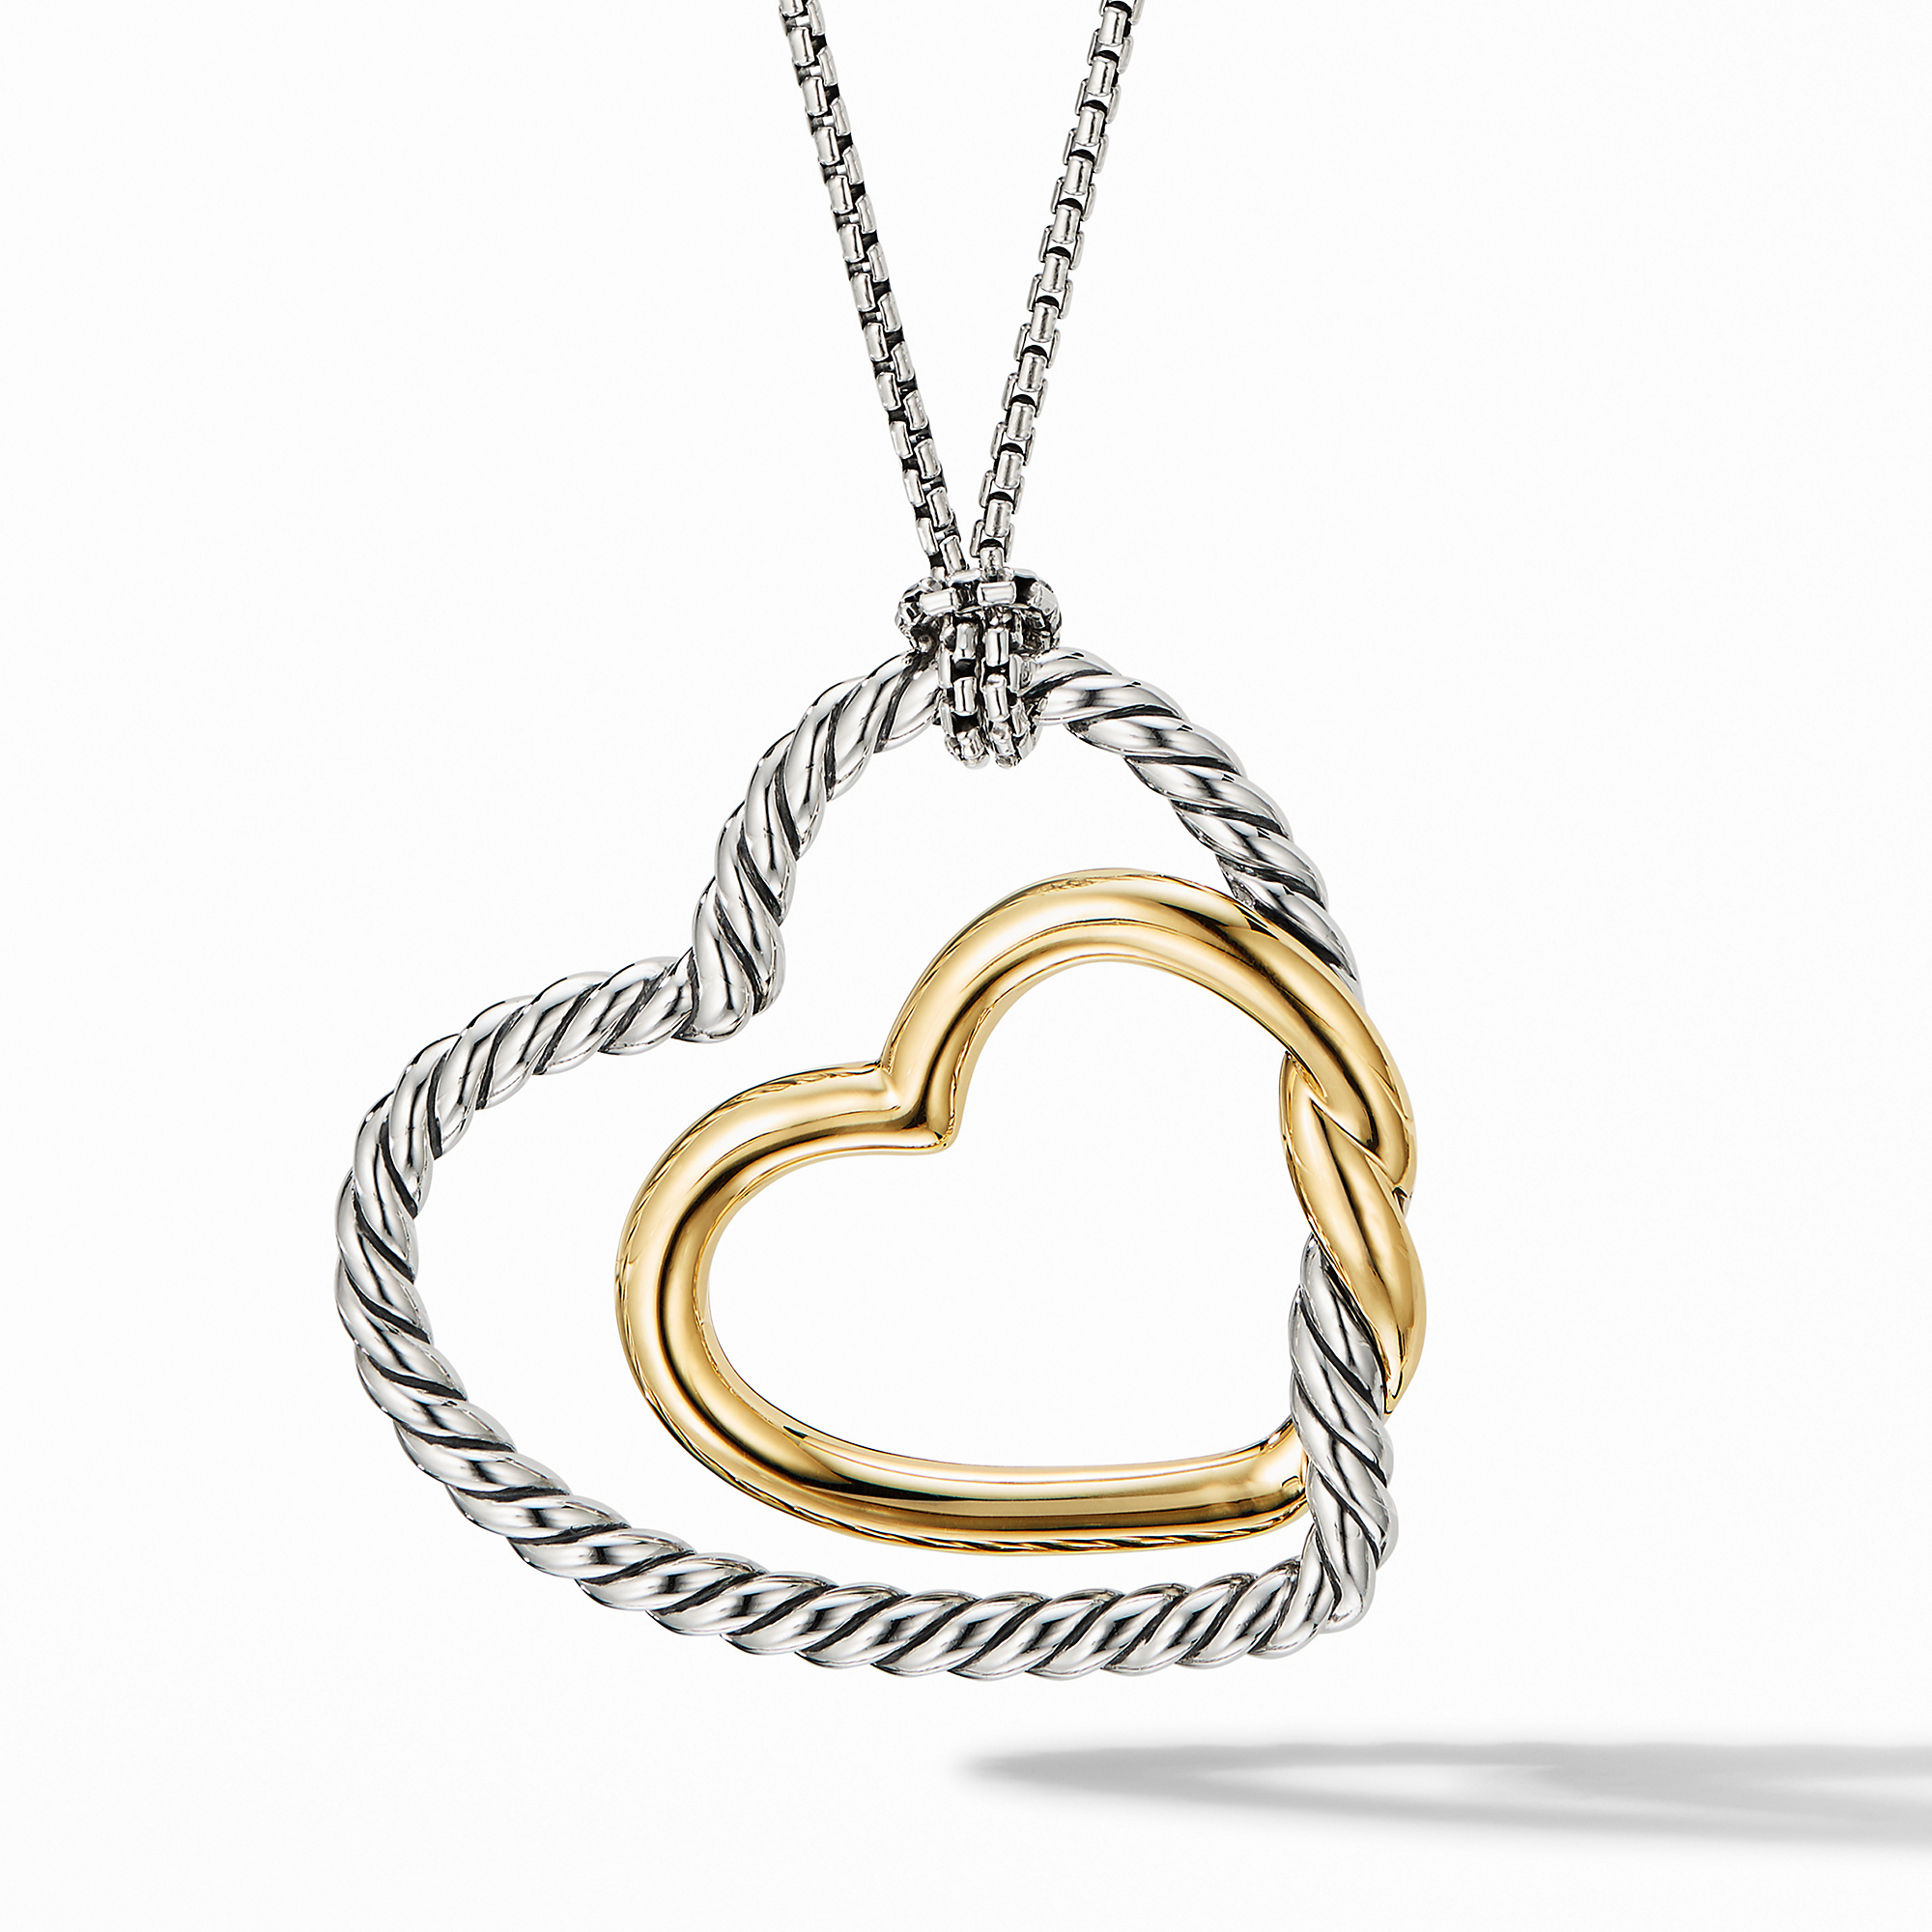 Continuance® Heart Necklace in Sterling Silver with 18K Yellow Gold